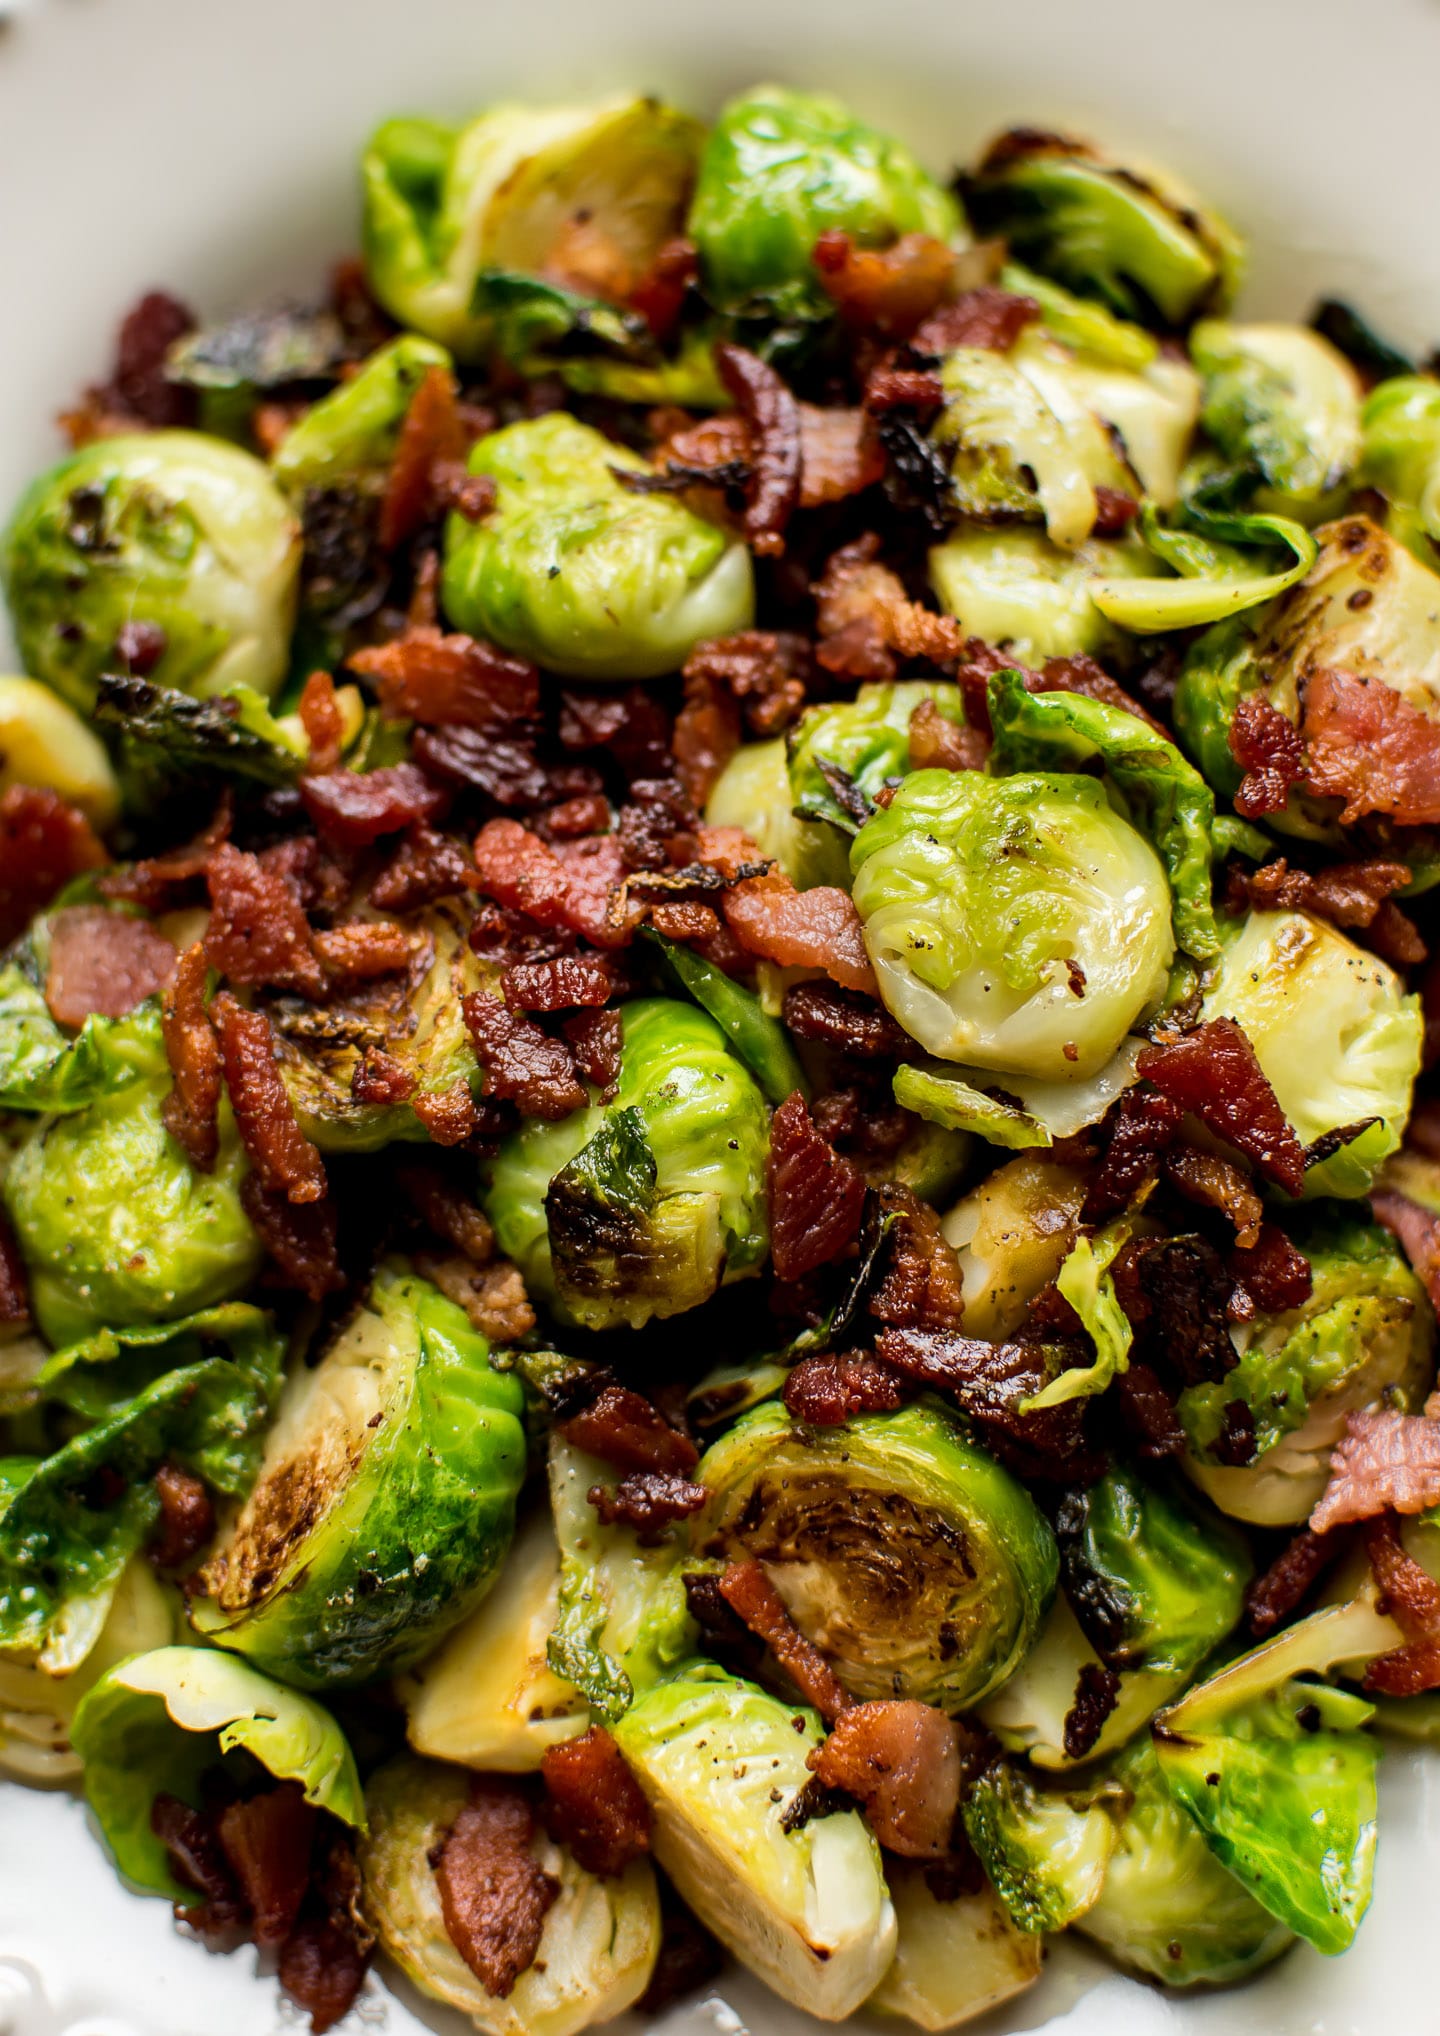 Easy Brussels Sprouts And Bacon Recipe Salt Lavender,Tiger Eye Stone Price